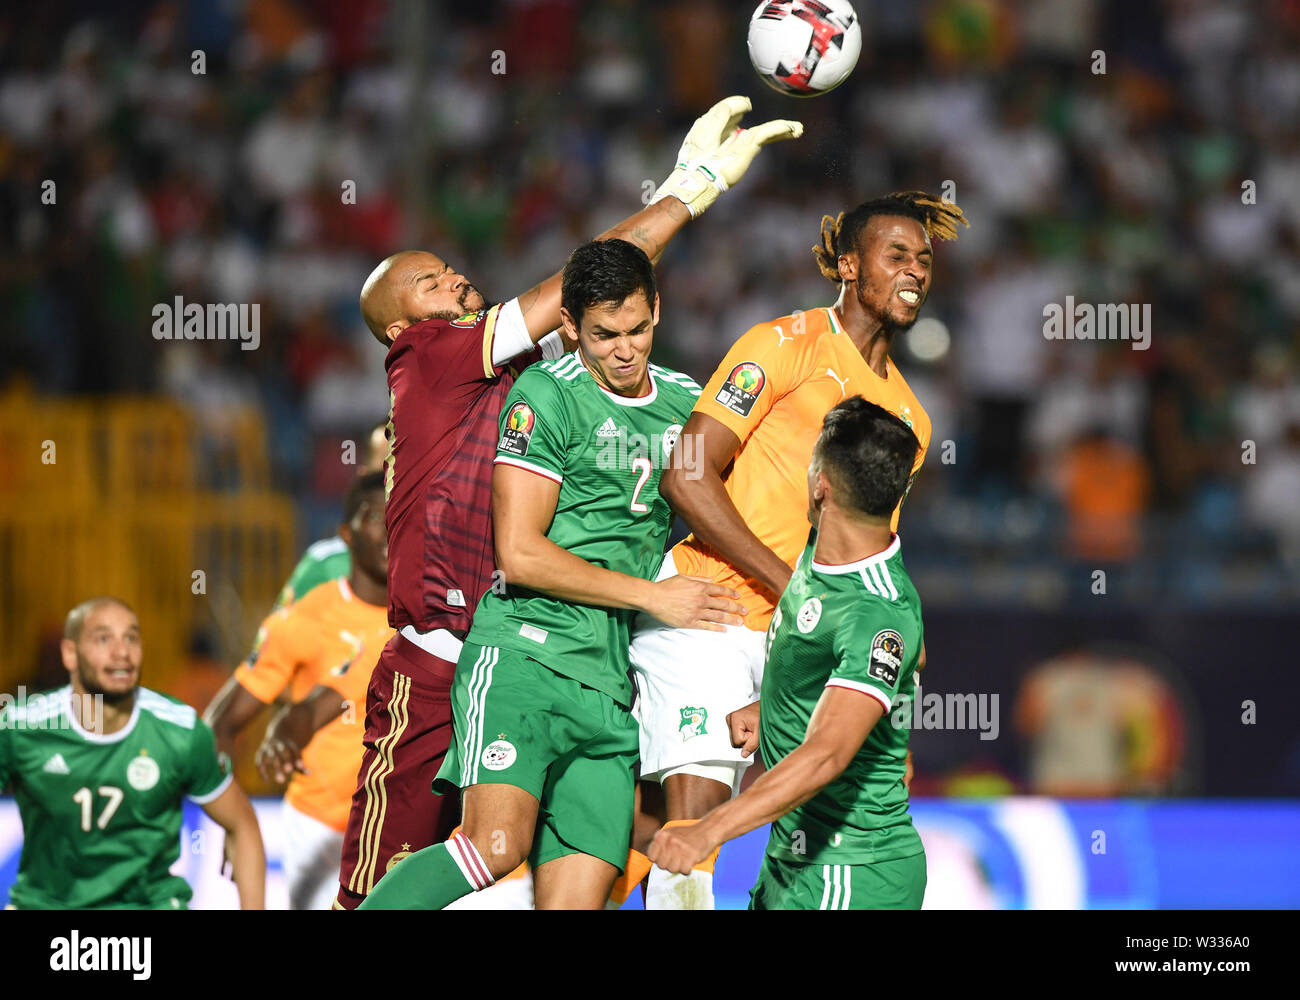 Suez. 11th July, 2019. Adi-Rais Cobos Mbolhi (1st L) of Algeria blocks a shot during the quarterfinal match between Cote d'Ivoire and Algeria at the 2019 Africa Cup of Nations in Suez, Egypt on July 11, 2019. The match ended 1-1 through extra time. Algeria beat Cote d'Ivoire 4-3 in a penalty shootout. Credit: Li Yan/Xinhua/Alamy Live News Stock Photo